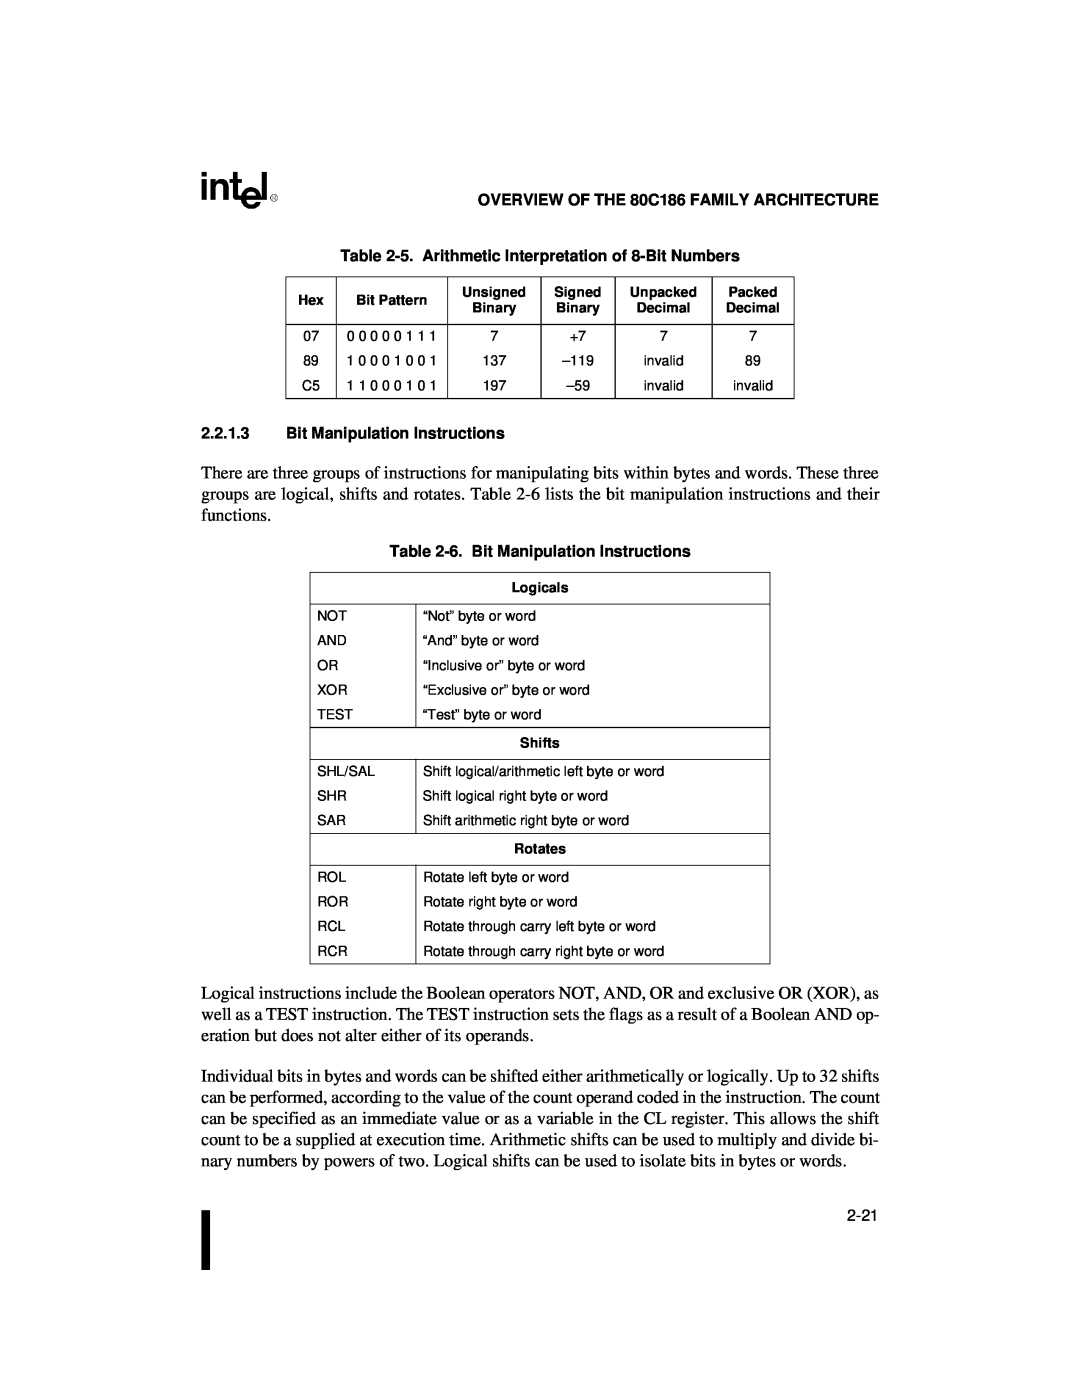 Intel 80C188XL OVERVIEW OF THE 80C186 FAMILY ARCHITECTURE, 2.2.1.3Bit Manipulation Instructions, Bit Pattern, Unsigned 